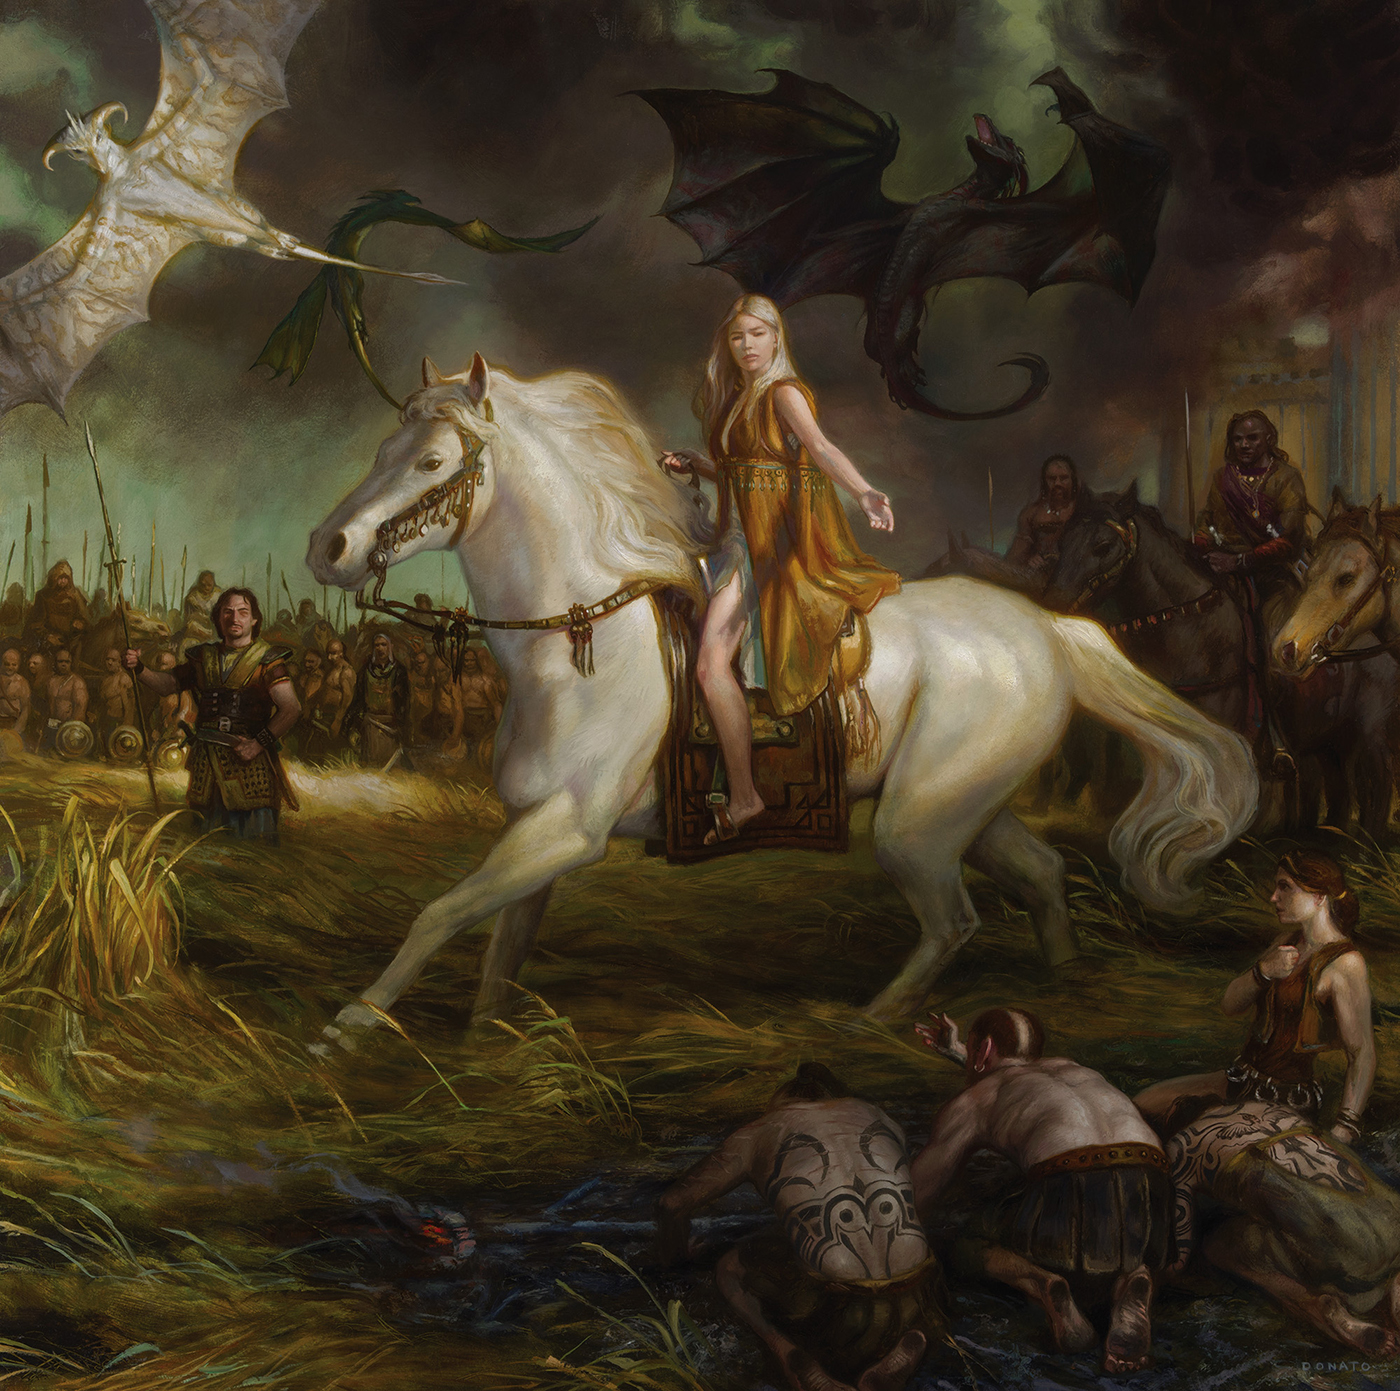 Mother of Dragons - Daenerys Targaryen
30" x 30"  oil on Panel  2014
Collection of George R.R. Martin